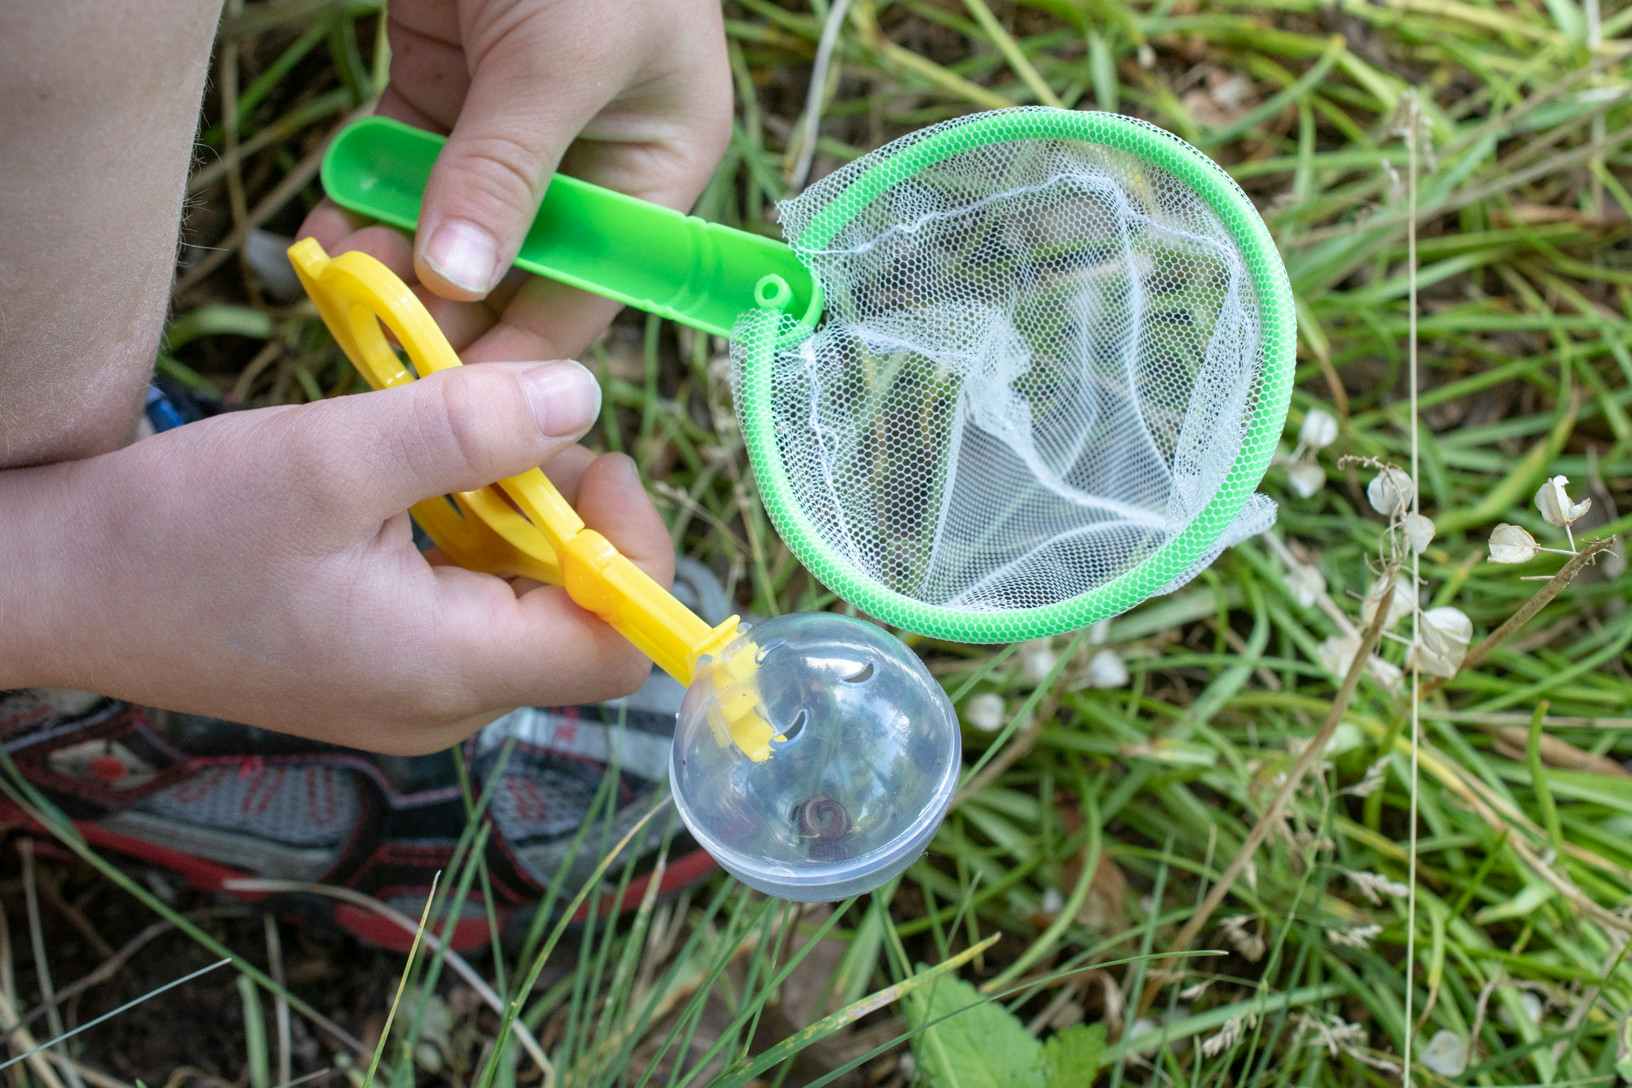 A child's hands holding a small net and a magnifying bug catching device above some grass.